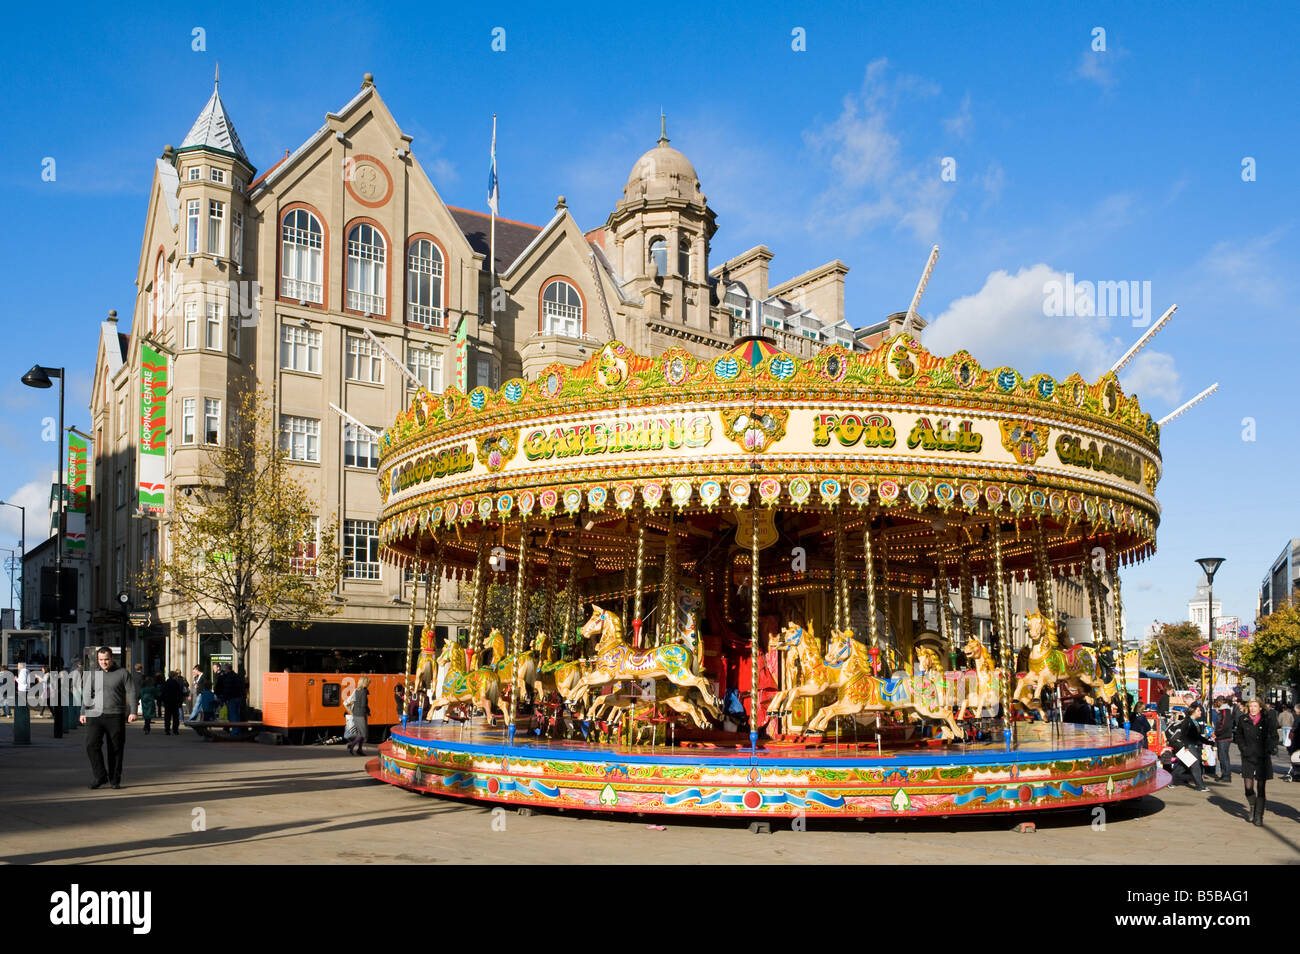 Carousel in Fargate,Sheffield,'South Yorkshire',England 'Great Britain' Stock Photo